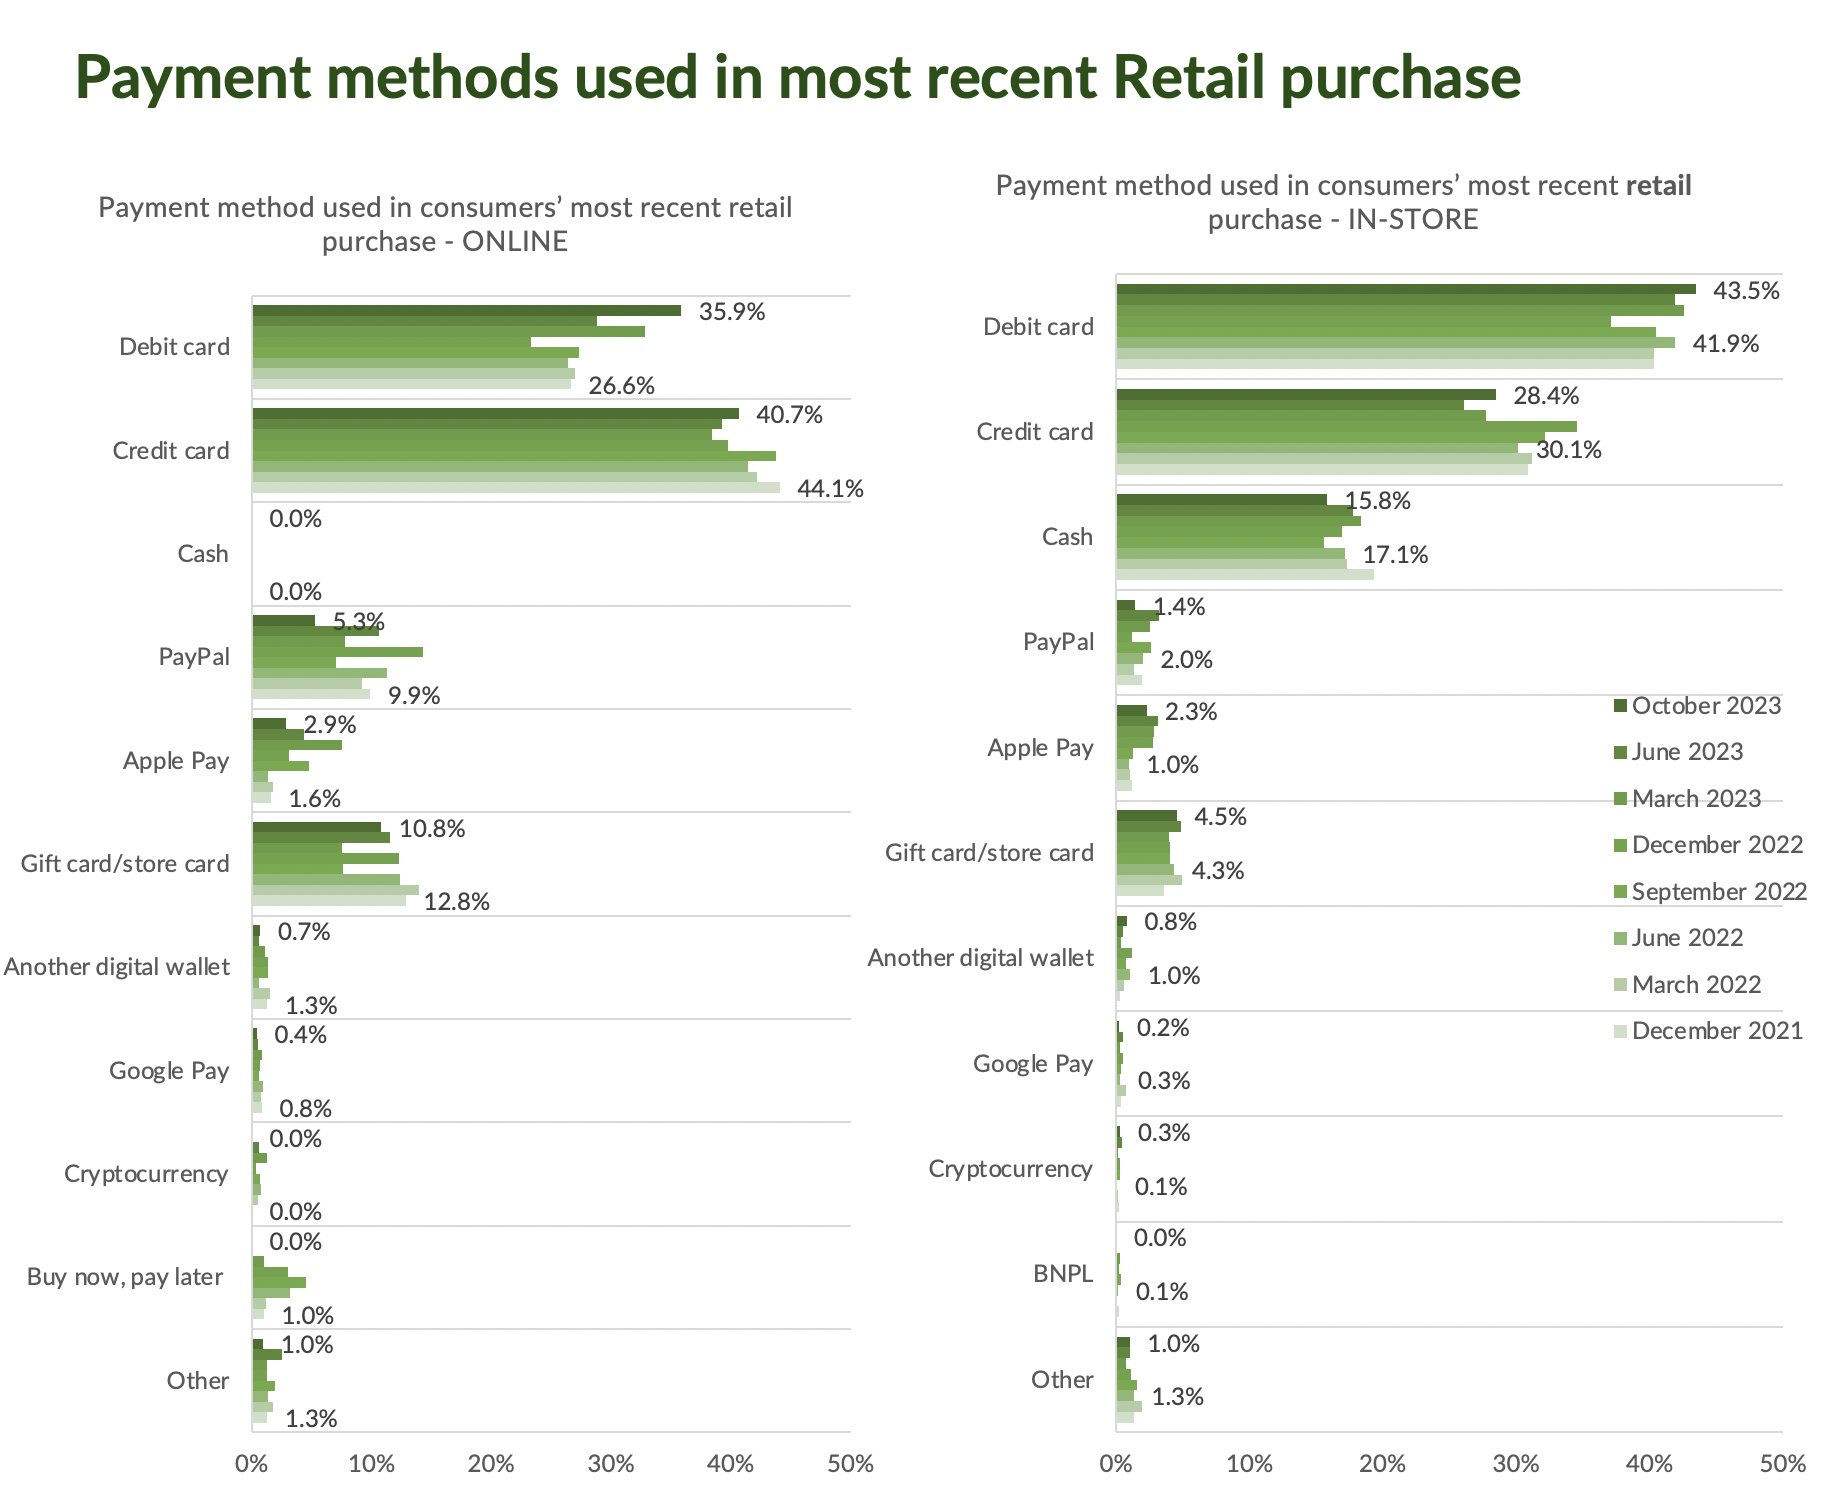 Payment methods used in most recent retail purchase